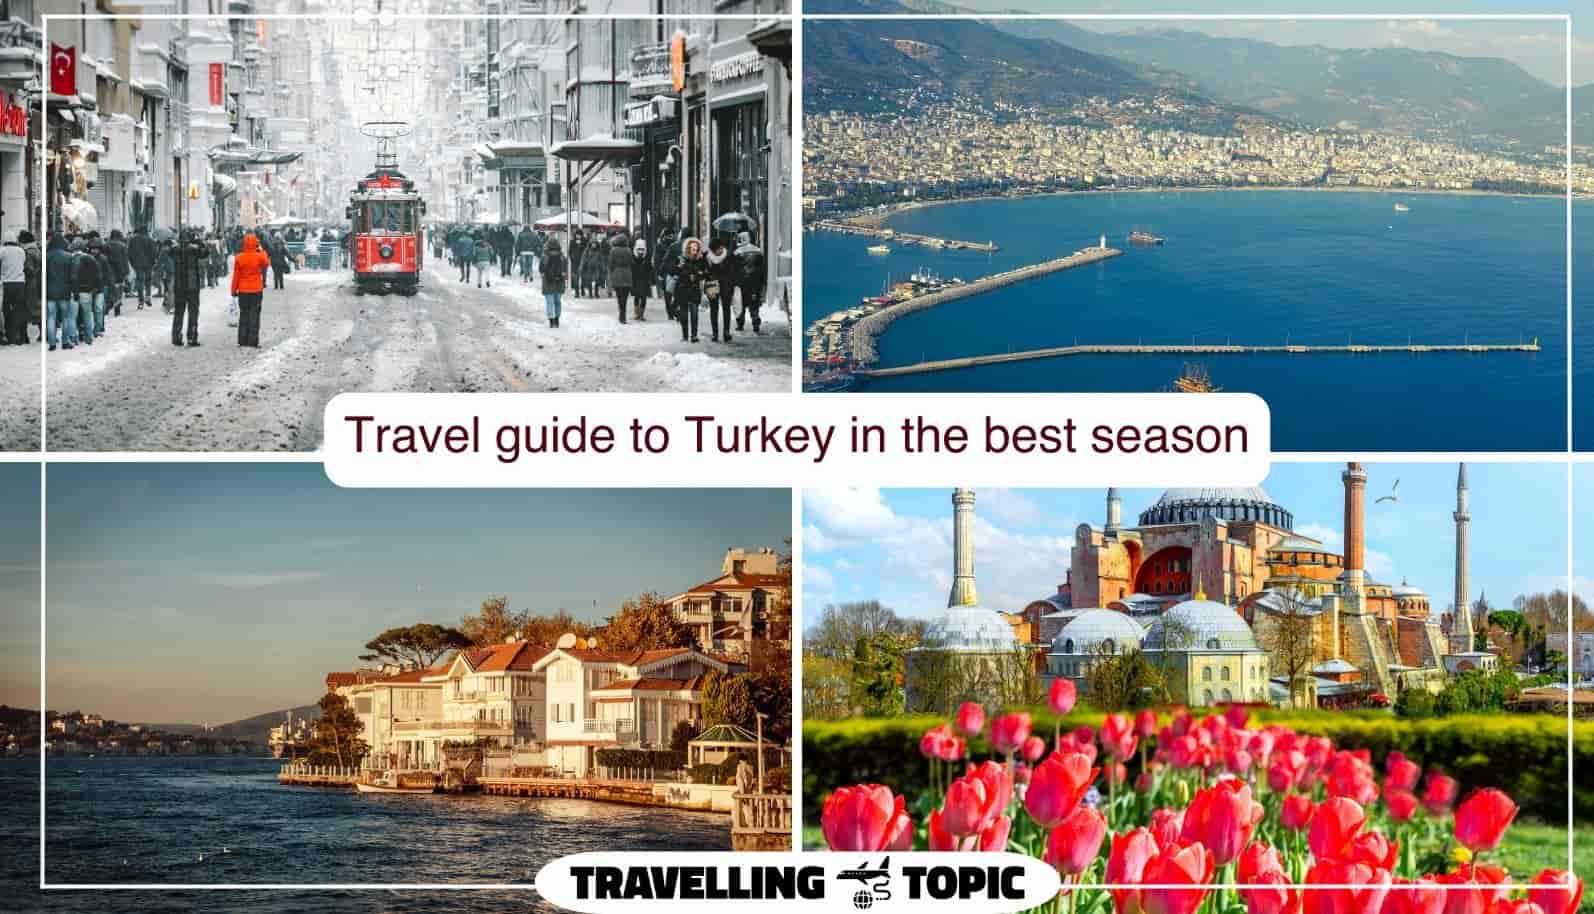 Travel guide to Turkey in the best season